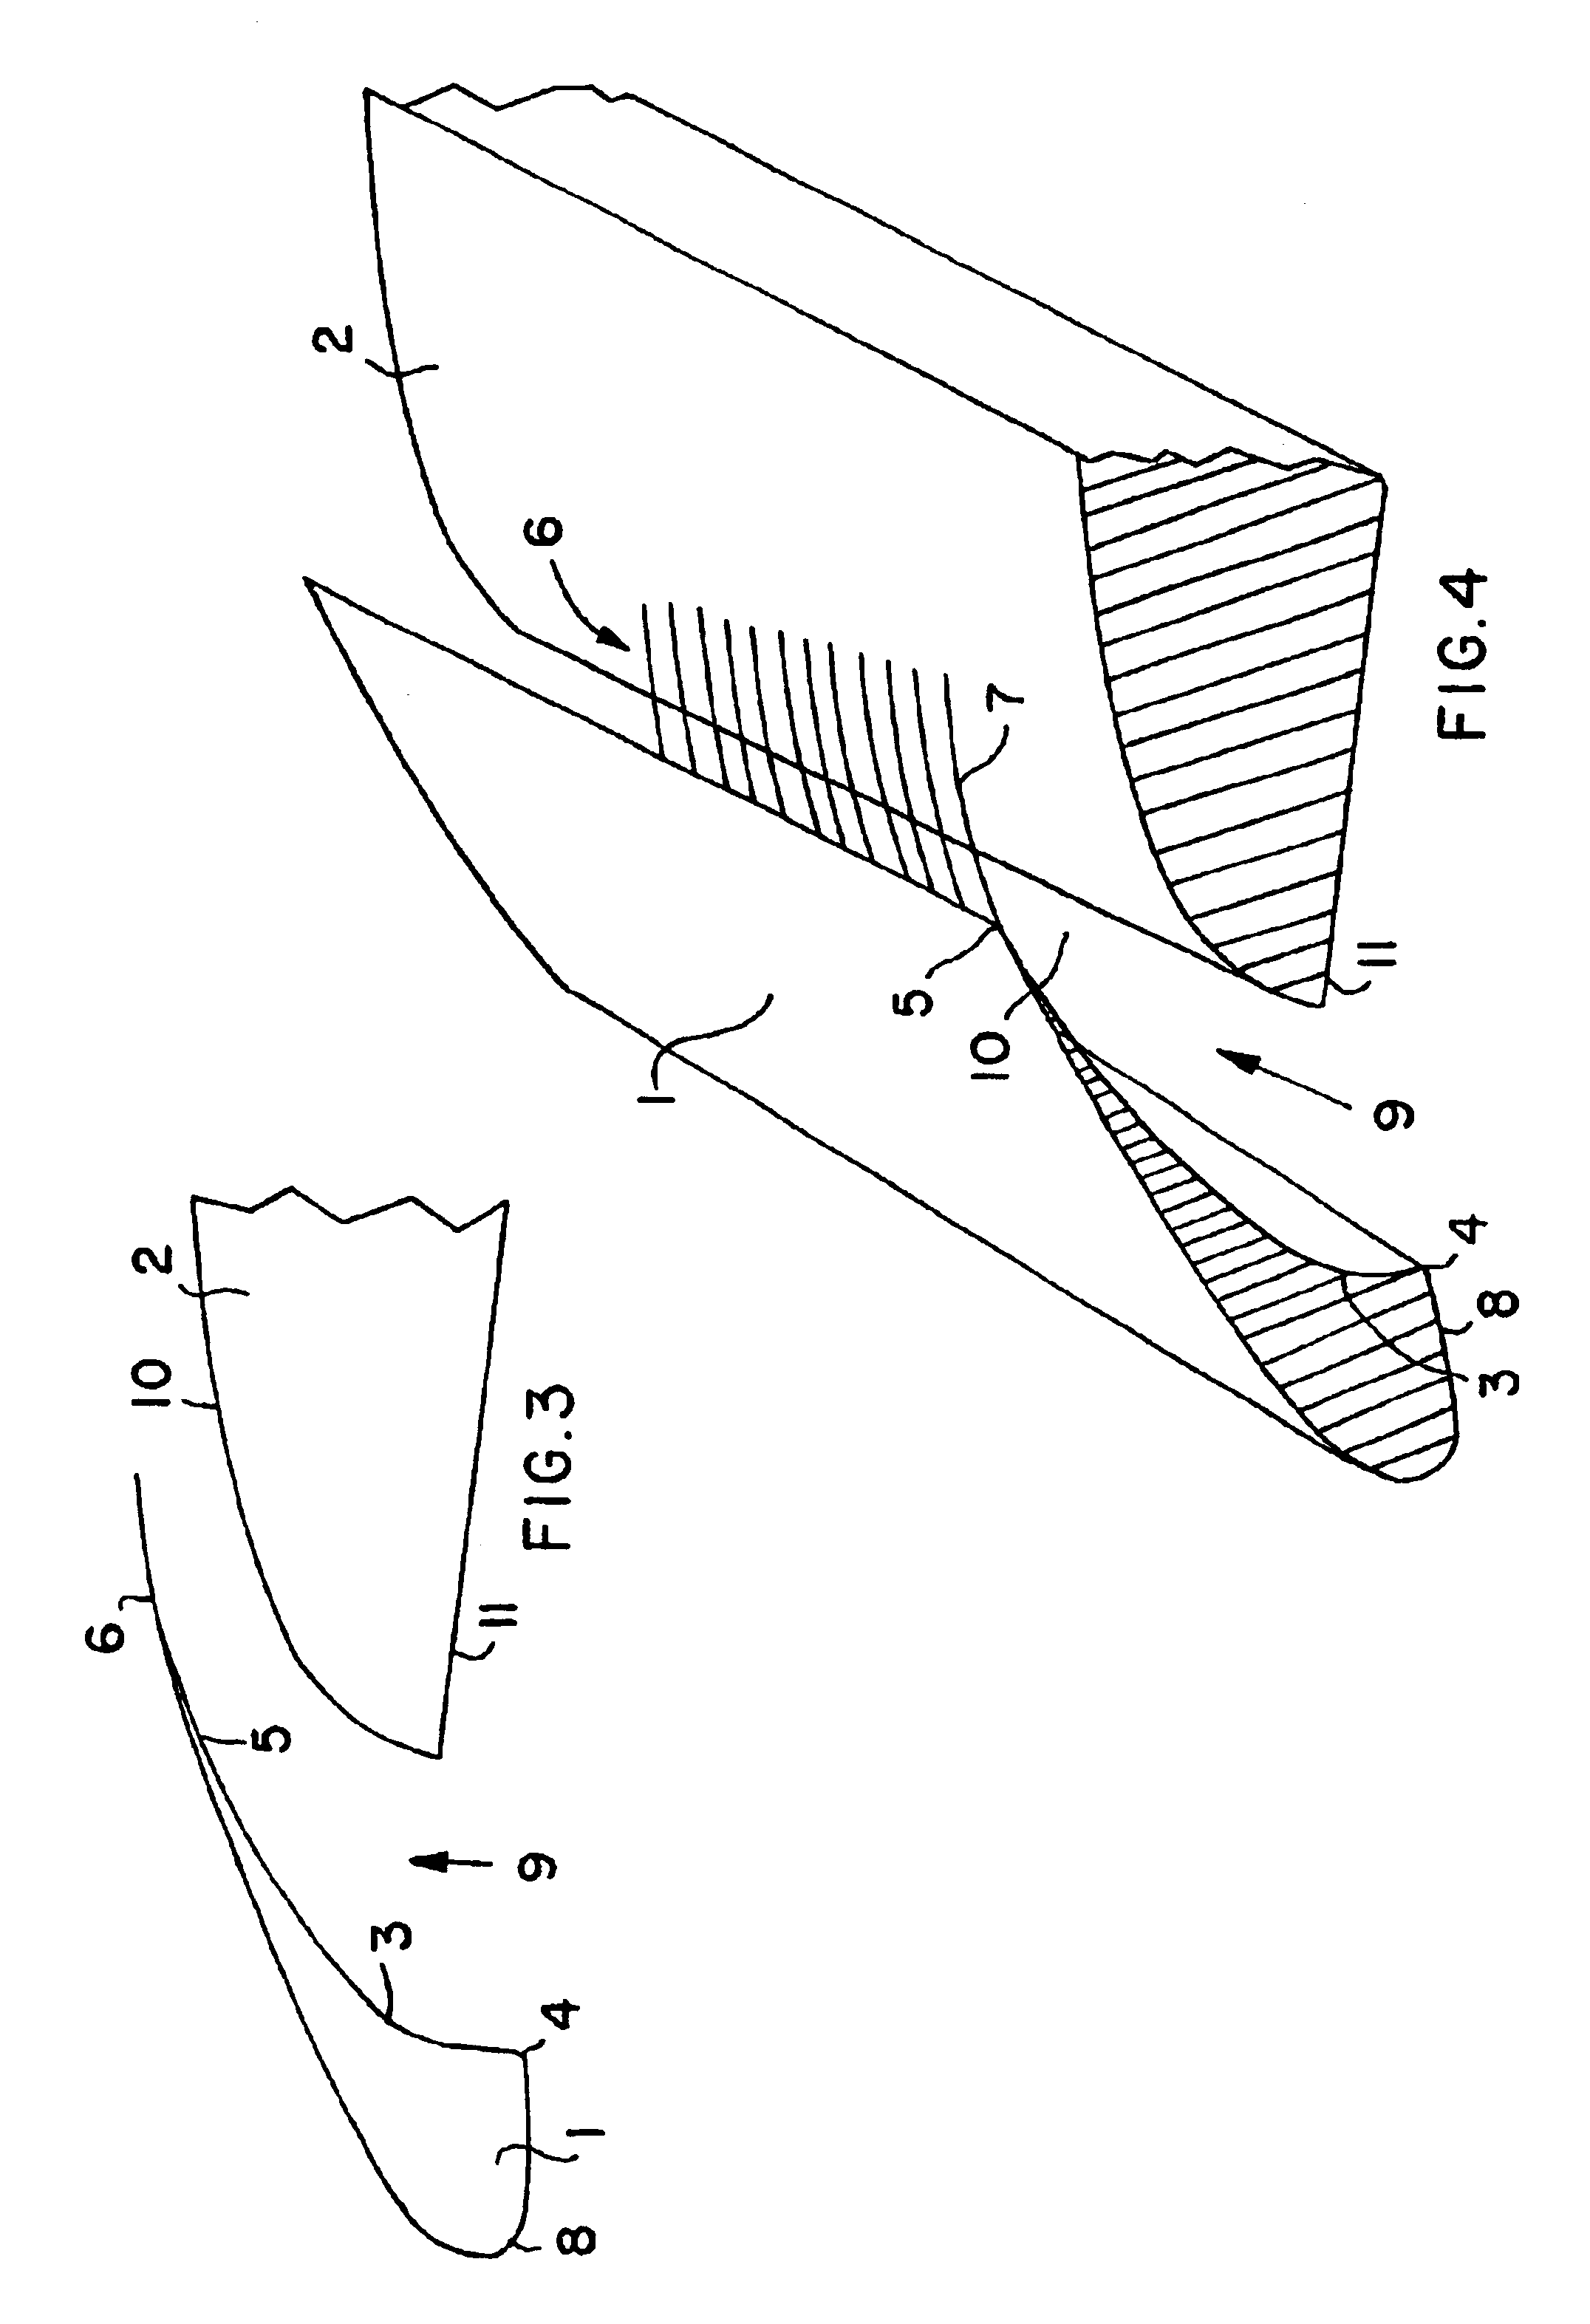 Flexible airflow separator to reduce aerodynamic noise generated by a leading edge slat of an aircraft wing